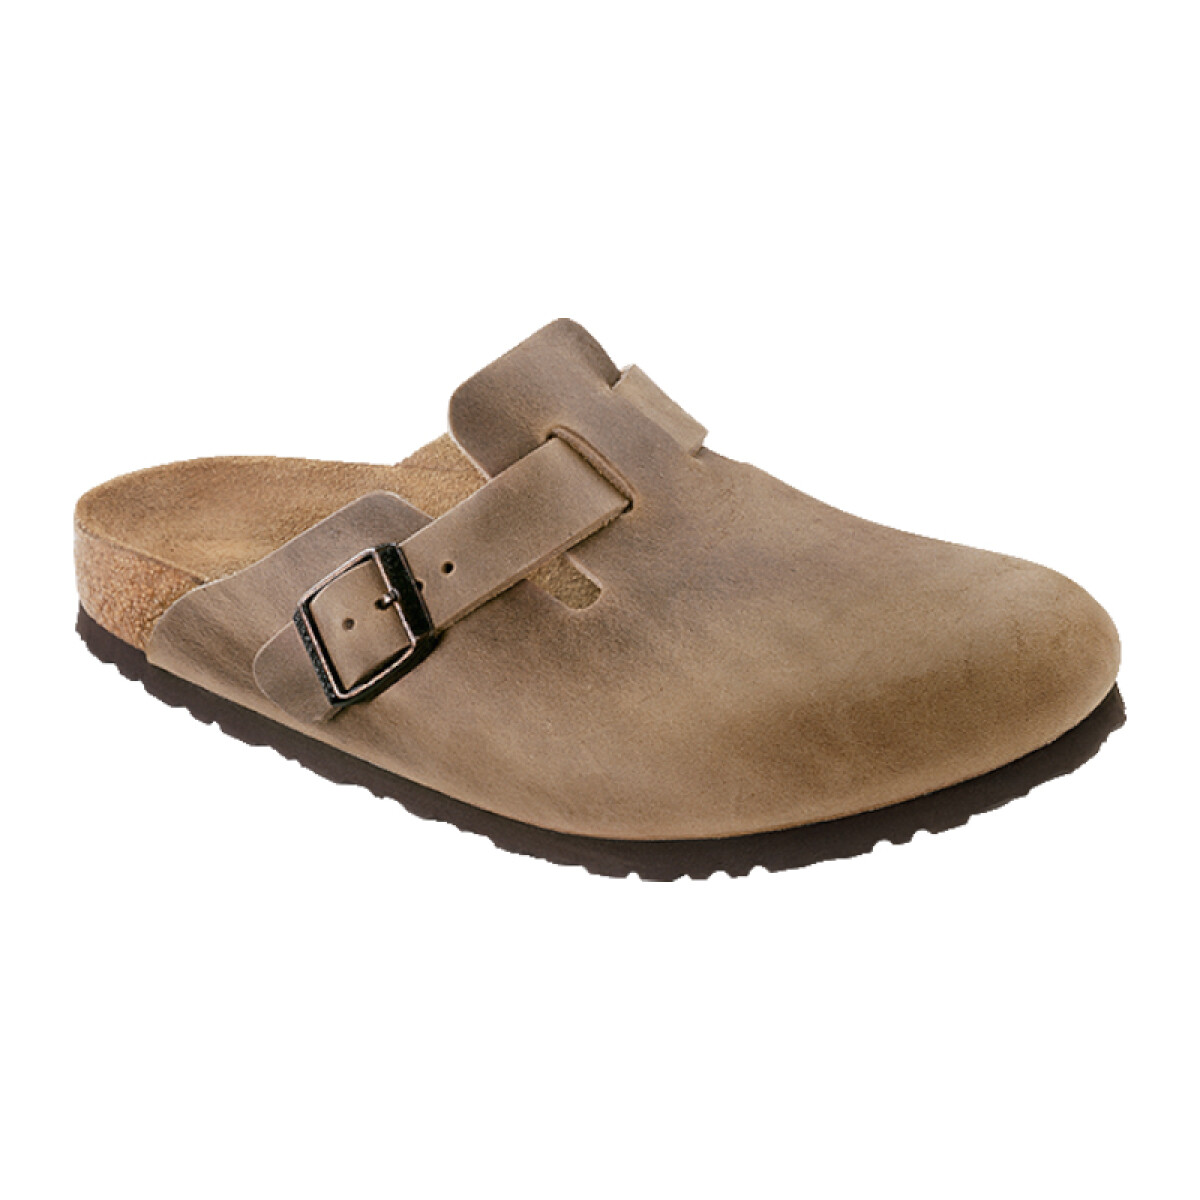 Zueco Boston Soft Footbed - Oiled Leather - Estrecho - Brown 